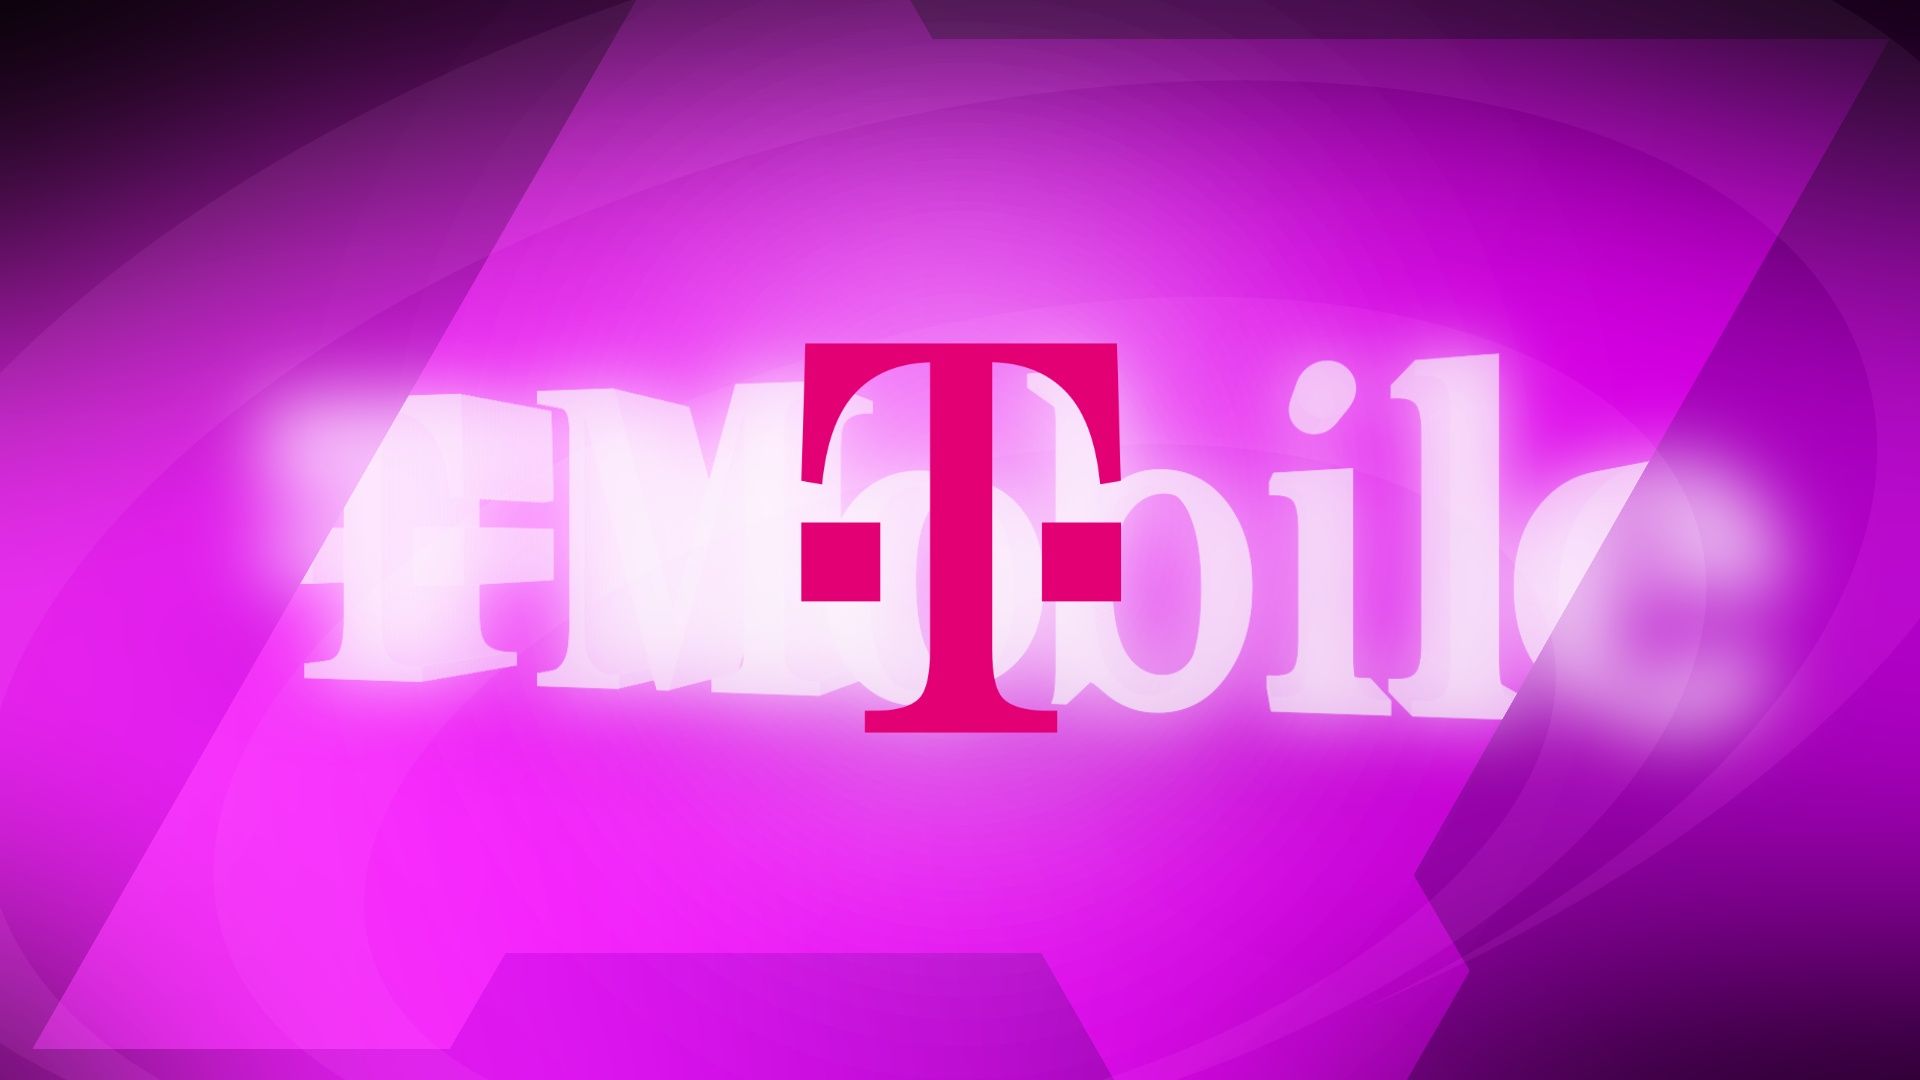 The T-Mobile logo against a purple background